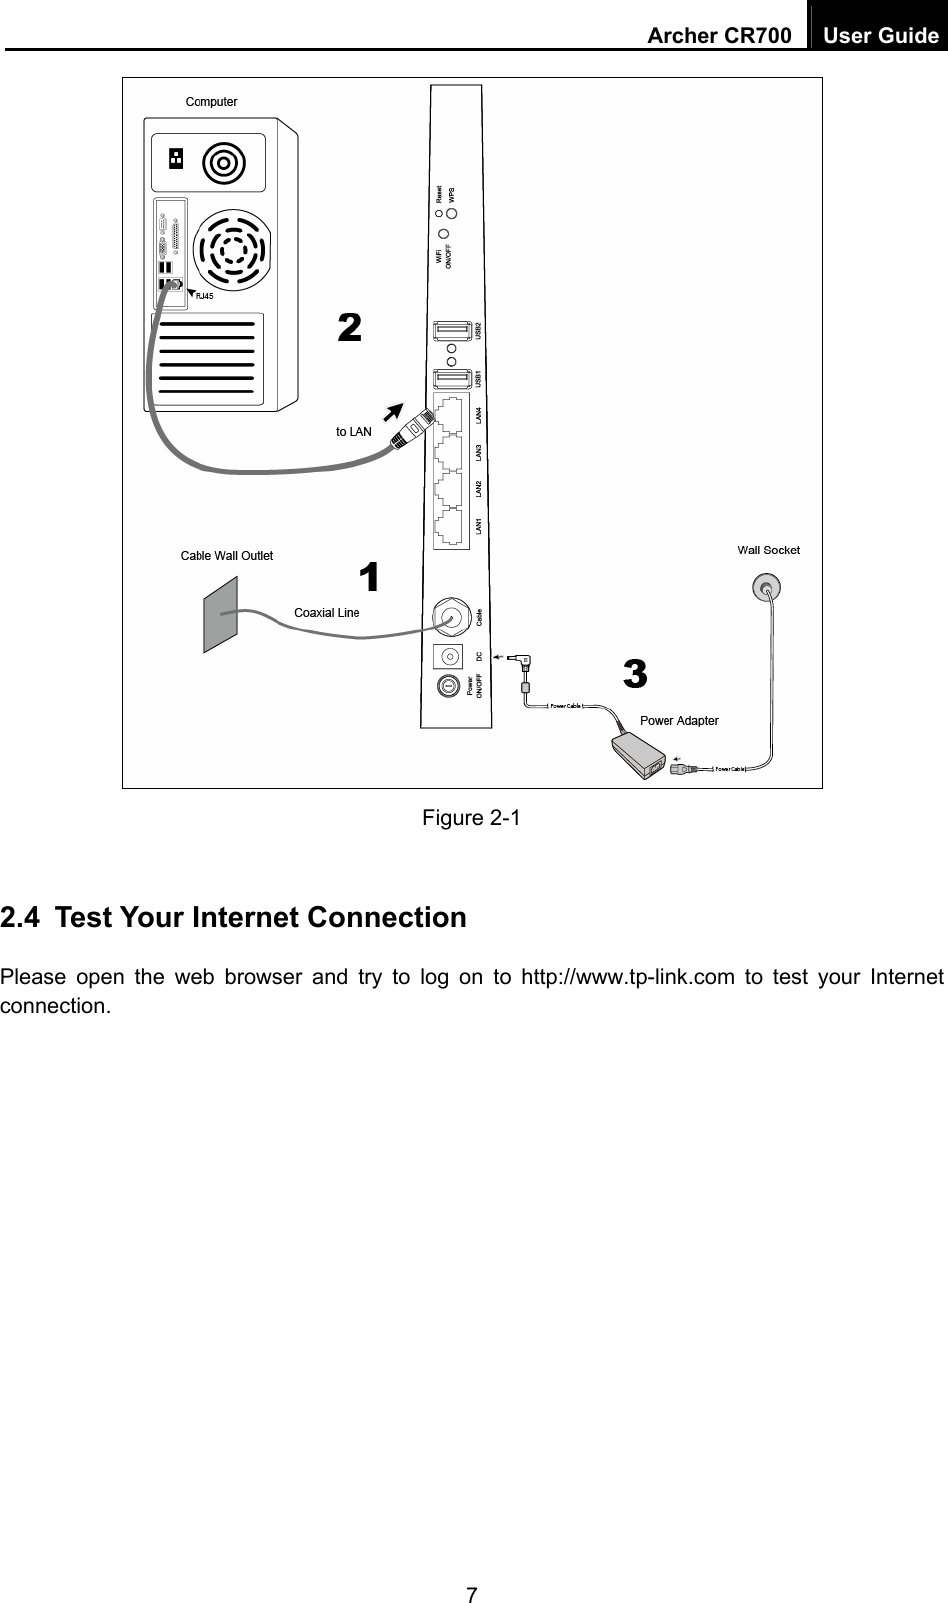 Archer CR700  User Guide 7  Figure 2-1  2.4  Test Your Internet Connection Please open the web browser and try to log on to http://www.tp-link.com to test your Internet connection. 